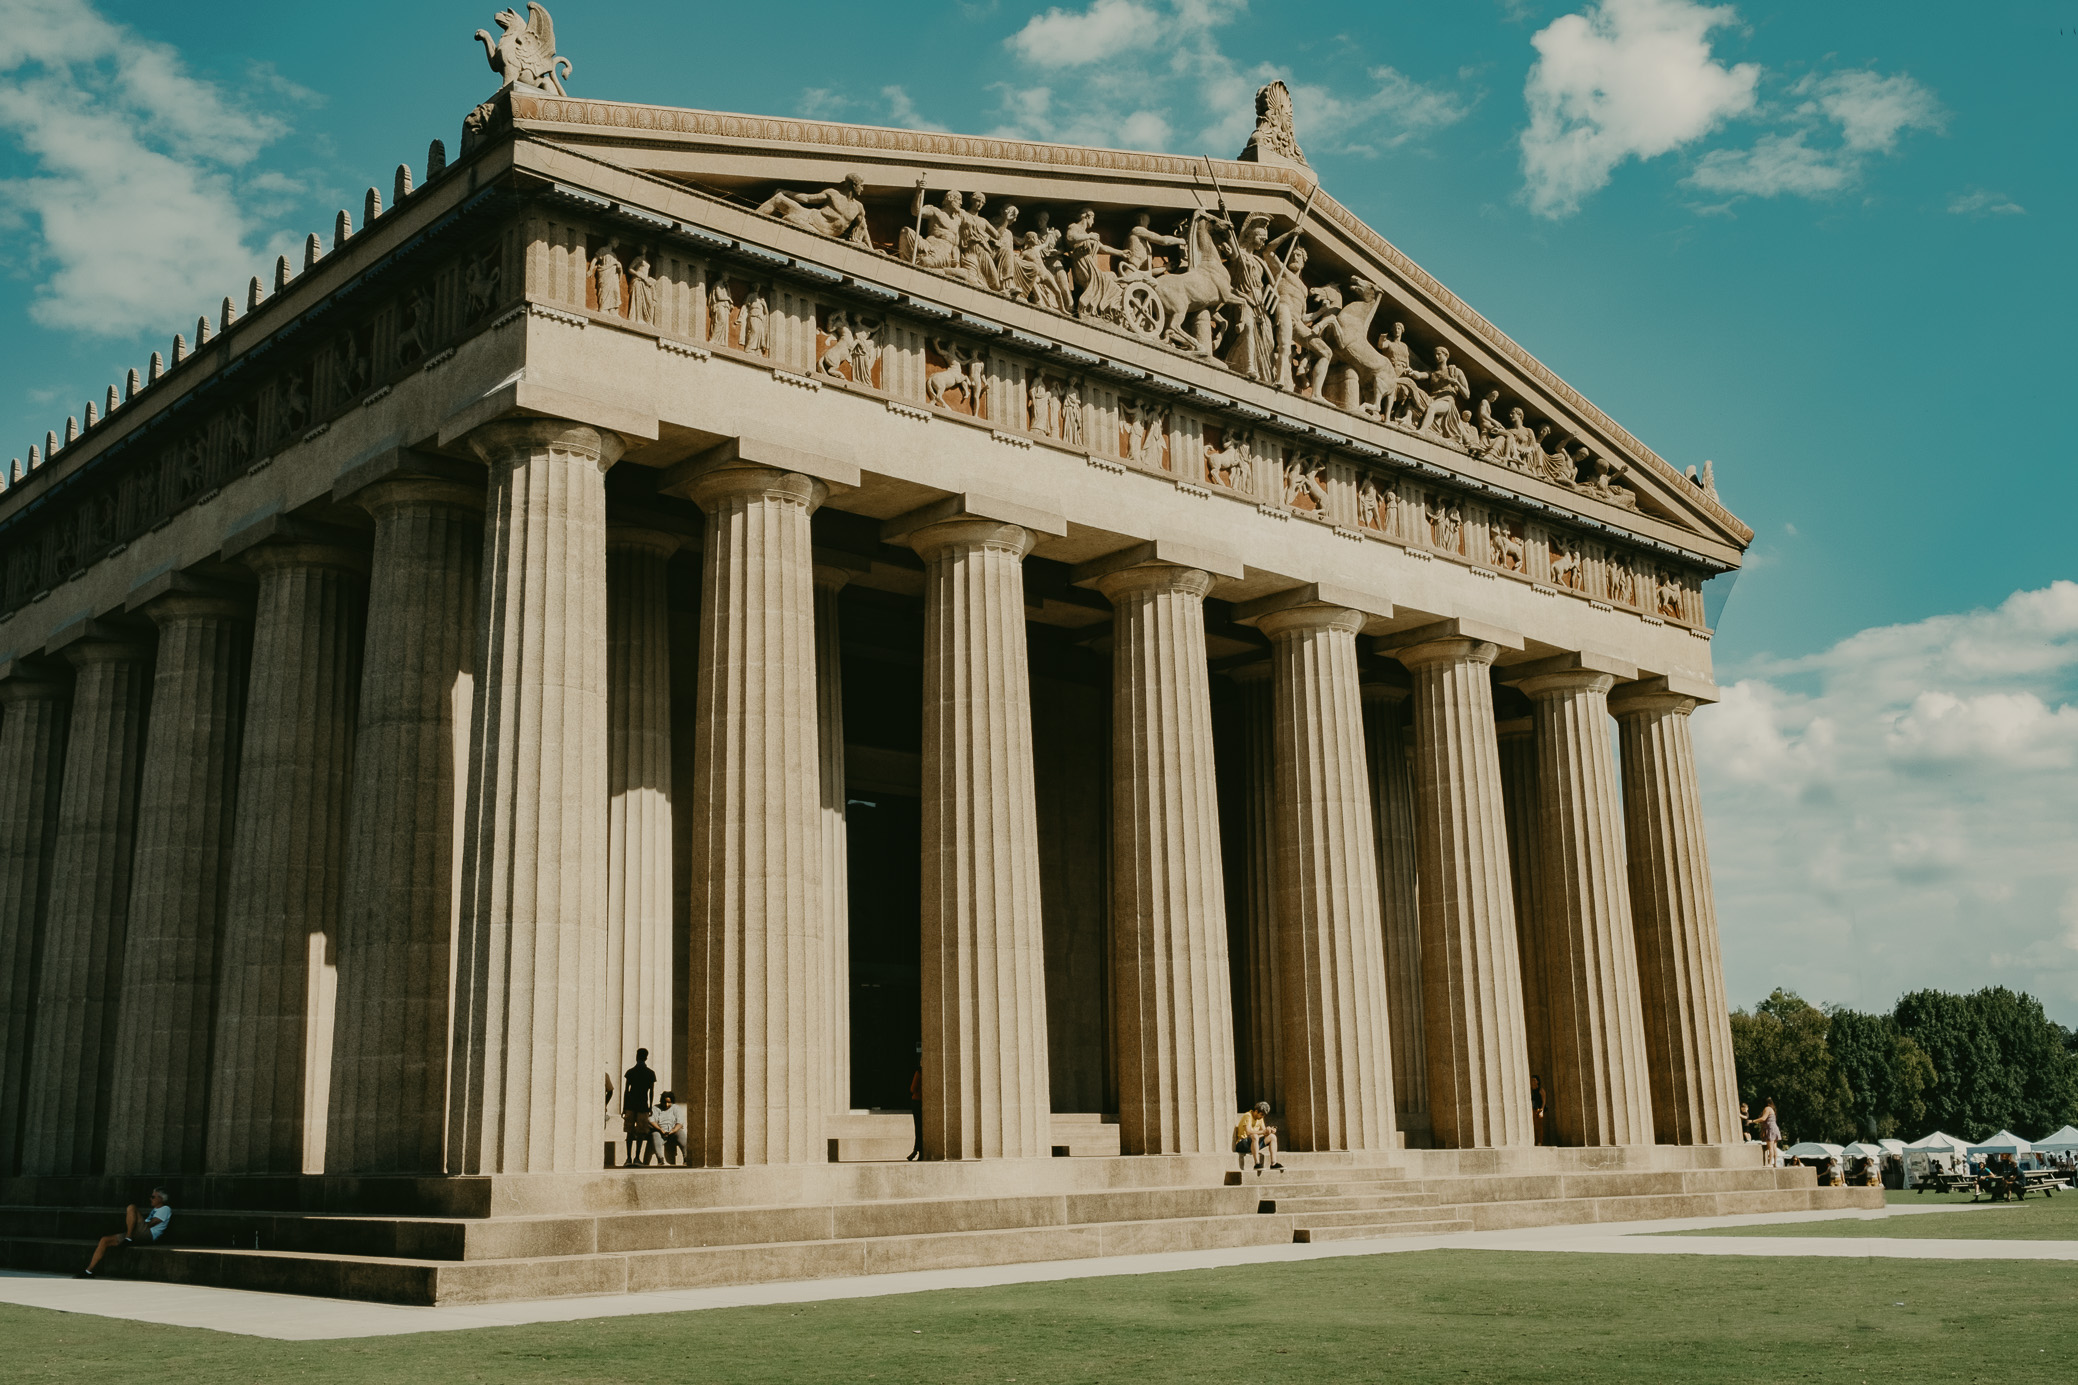 The Parthenon | Nashville, Tennessee | October 8th, 2021